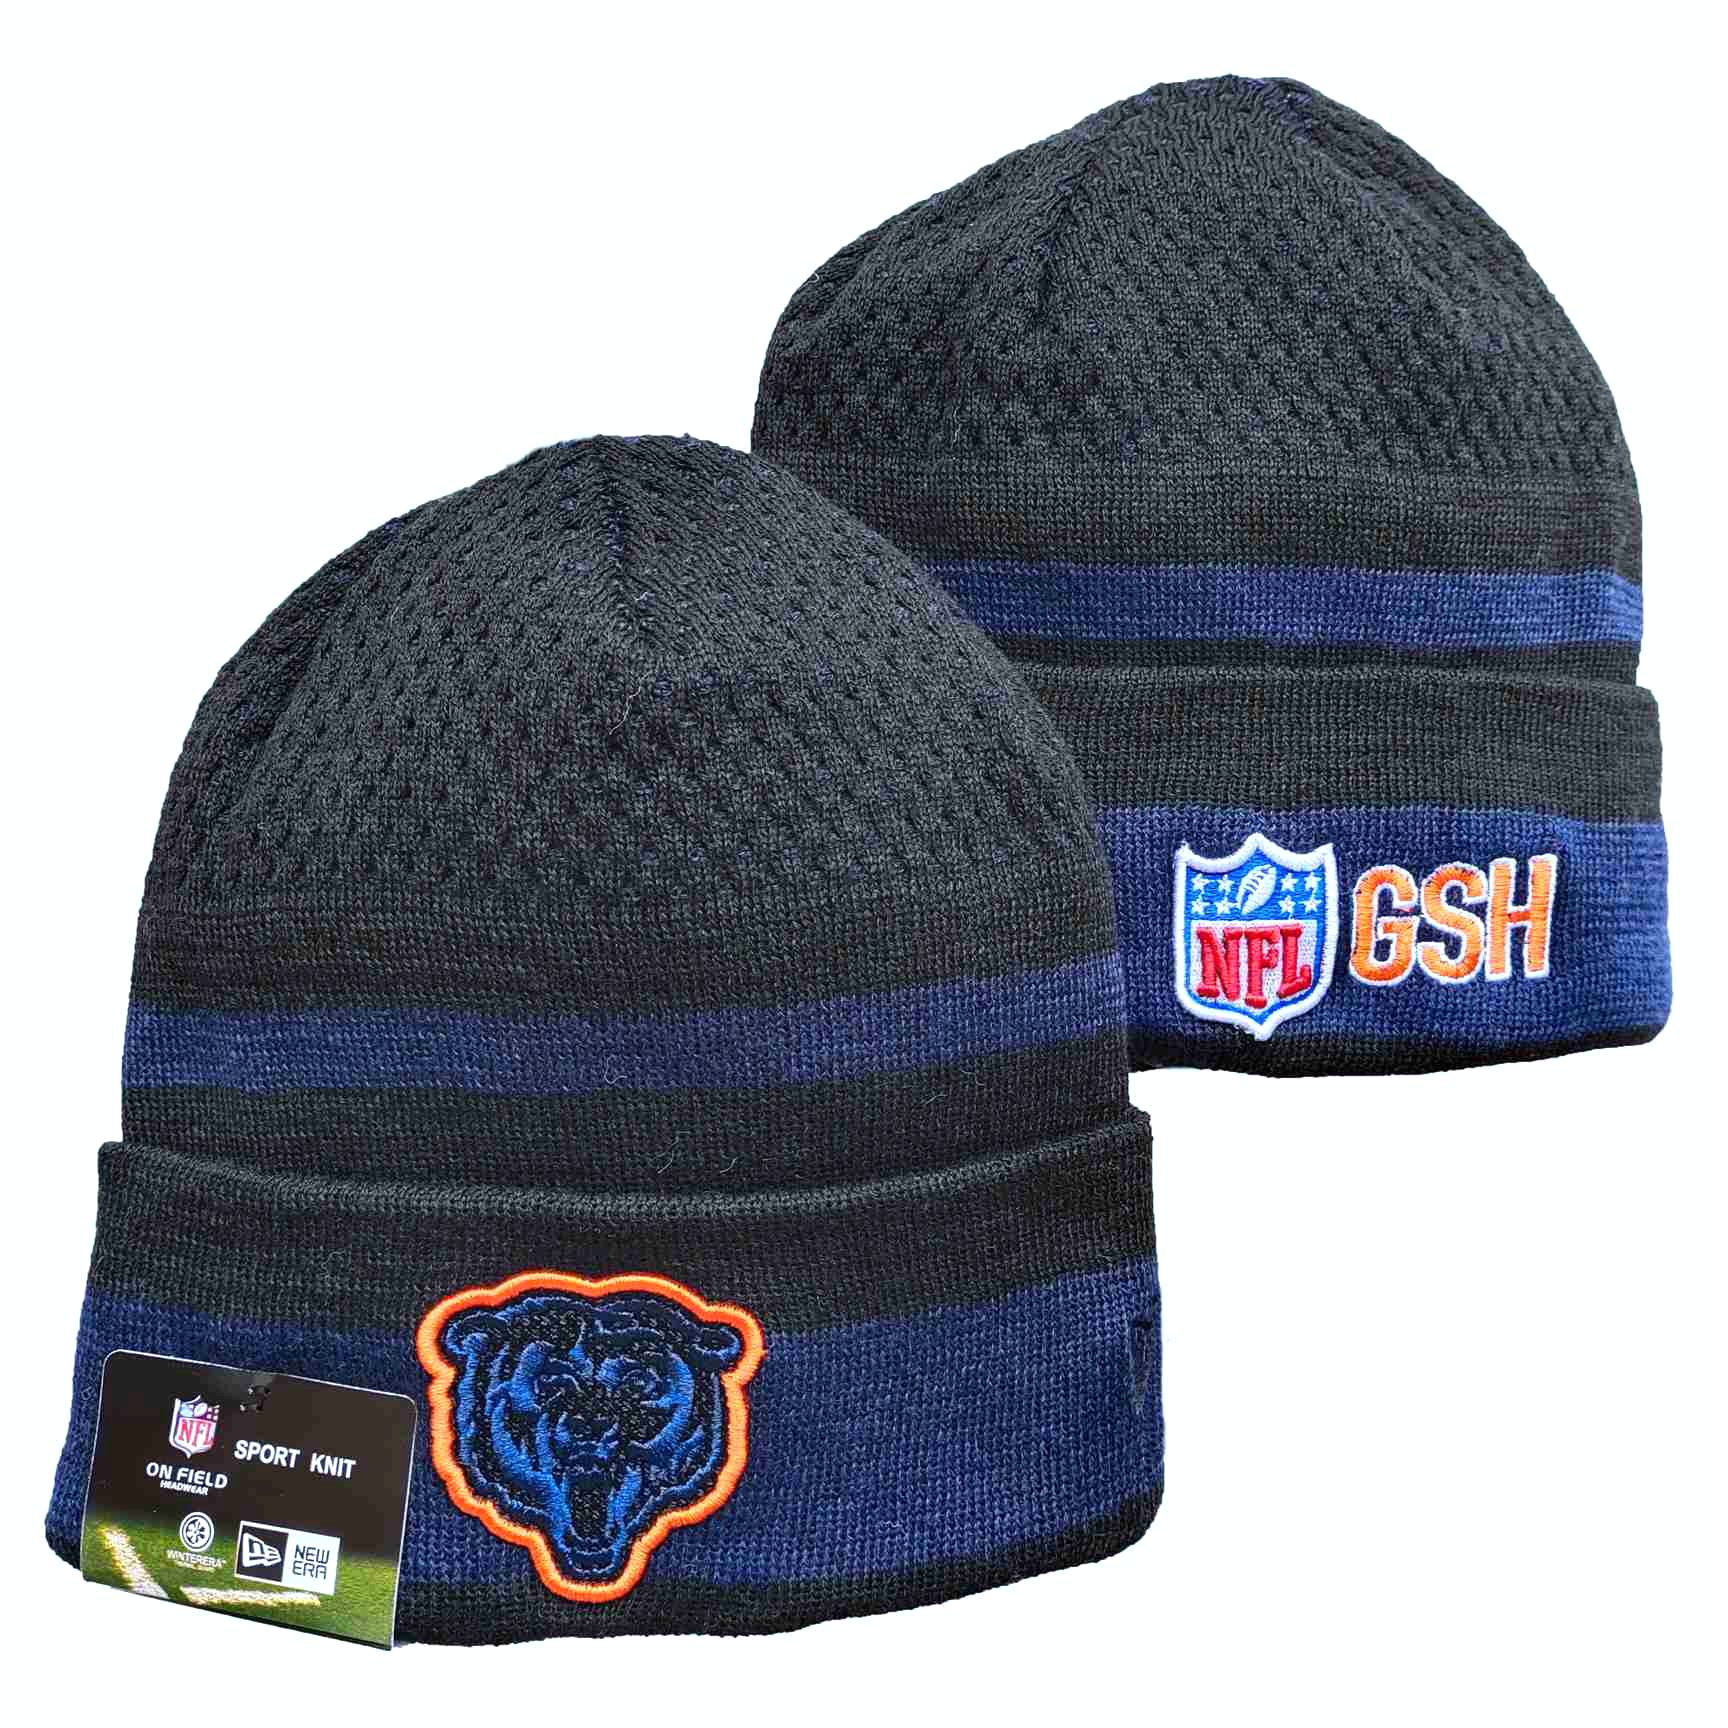 NFL Chicago Bears Beanies Knit Hats-YD887